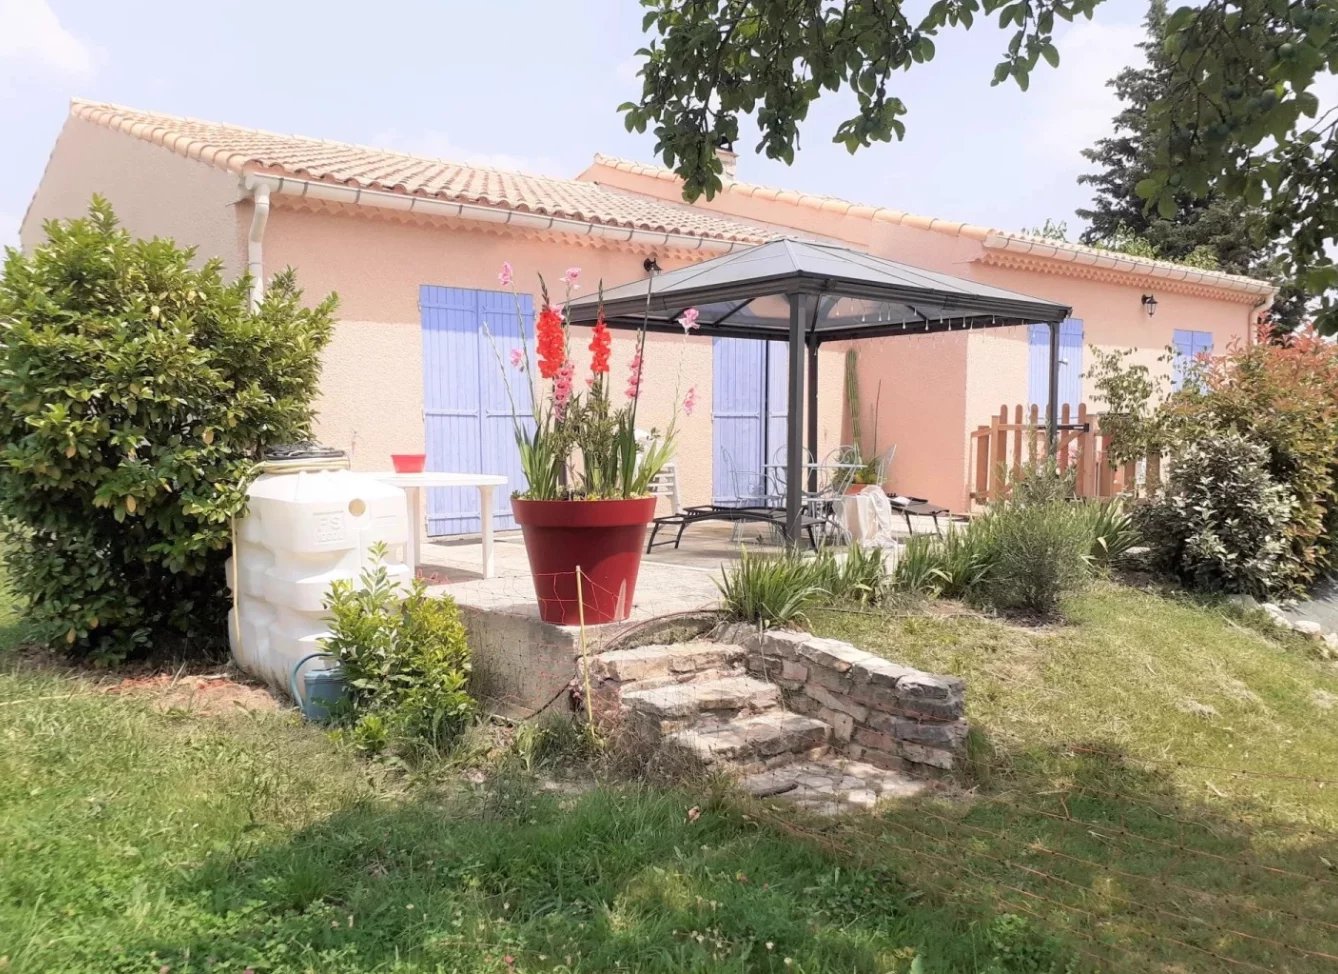 Walking distance from the centre of Le val, in a quiet area